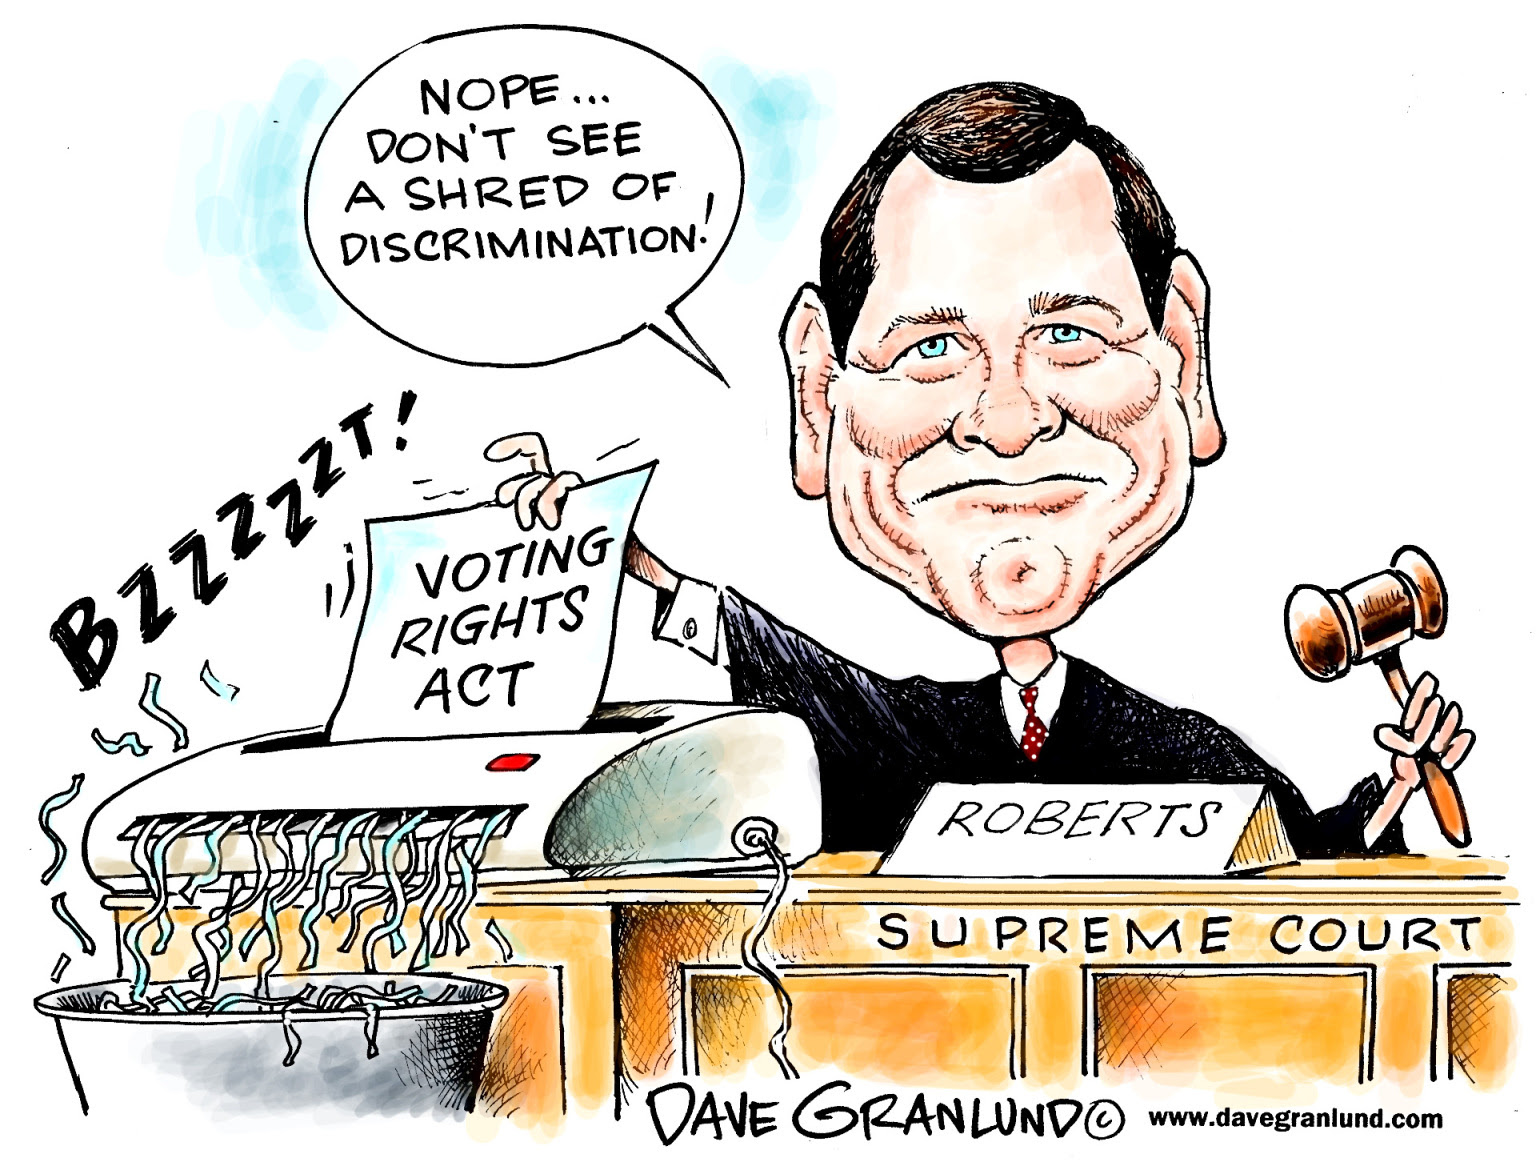 Roberts Supreme Court guts the Voting Rights Act.